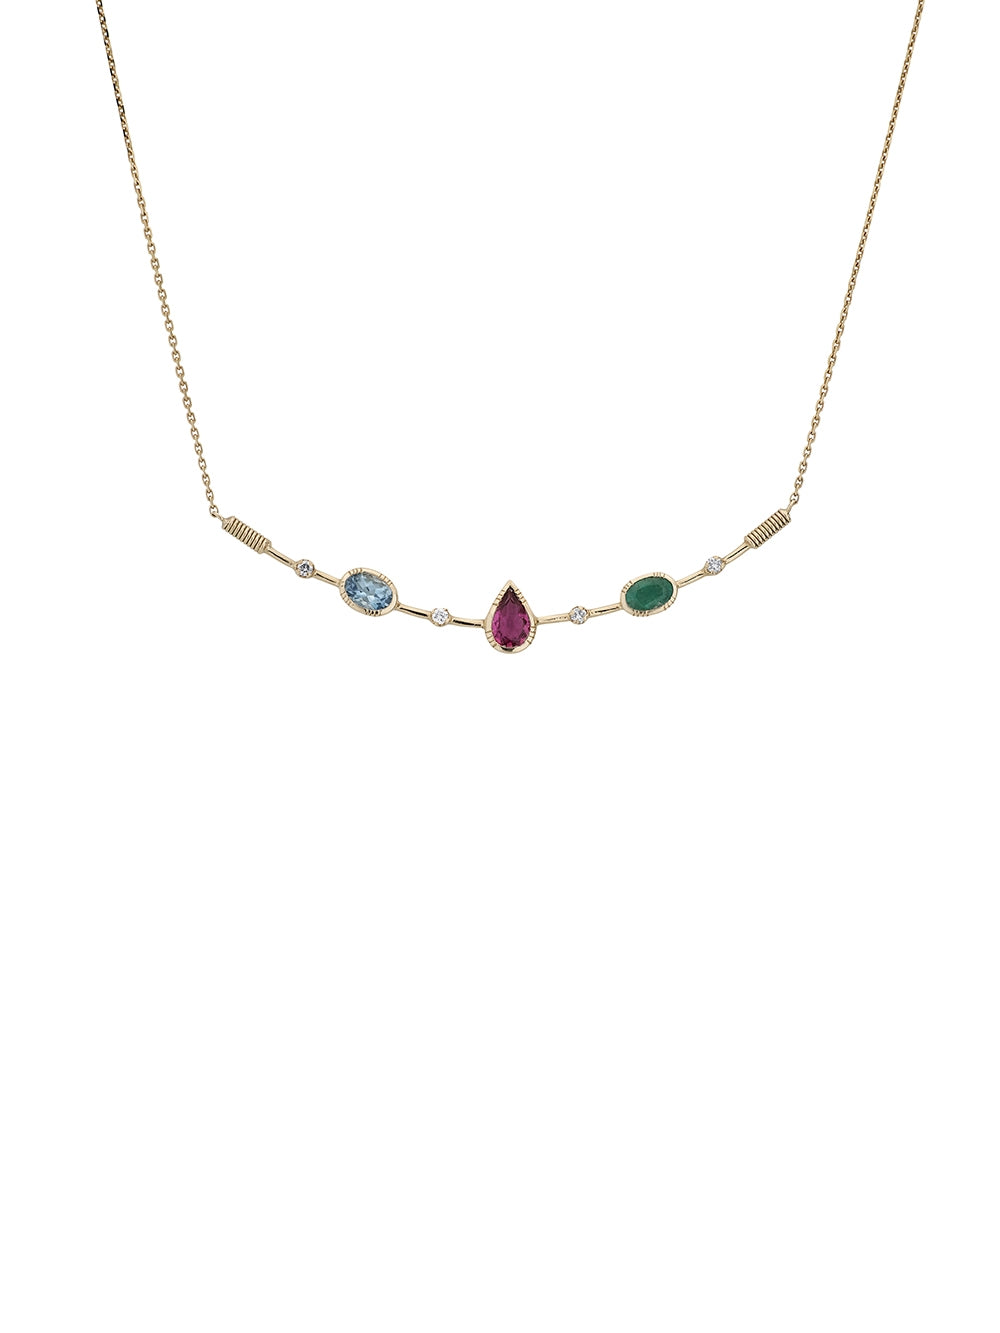 INDIE MULTI RUBELLITTE NECKLACE